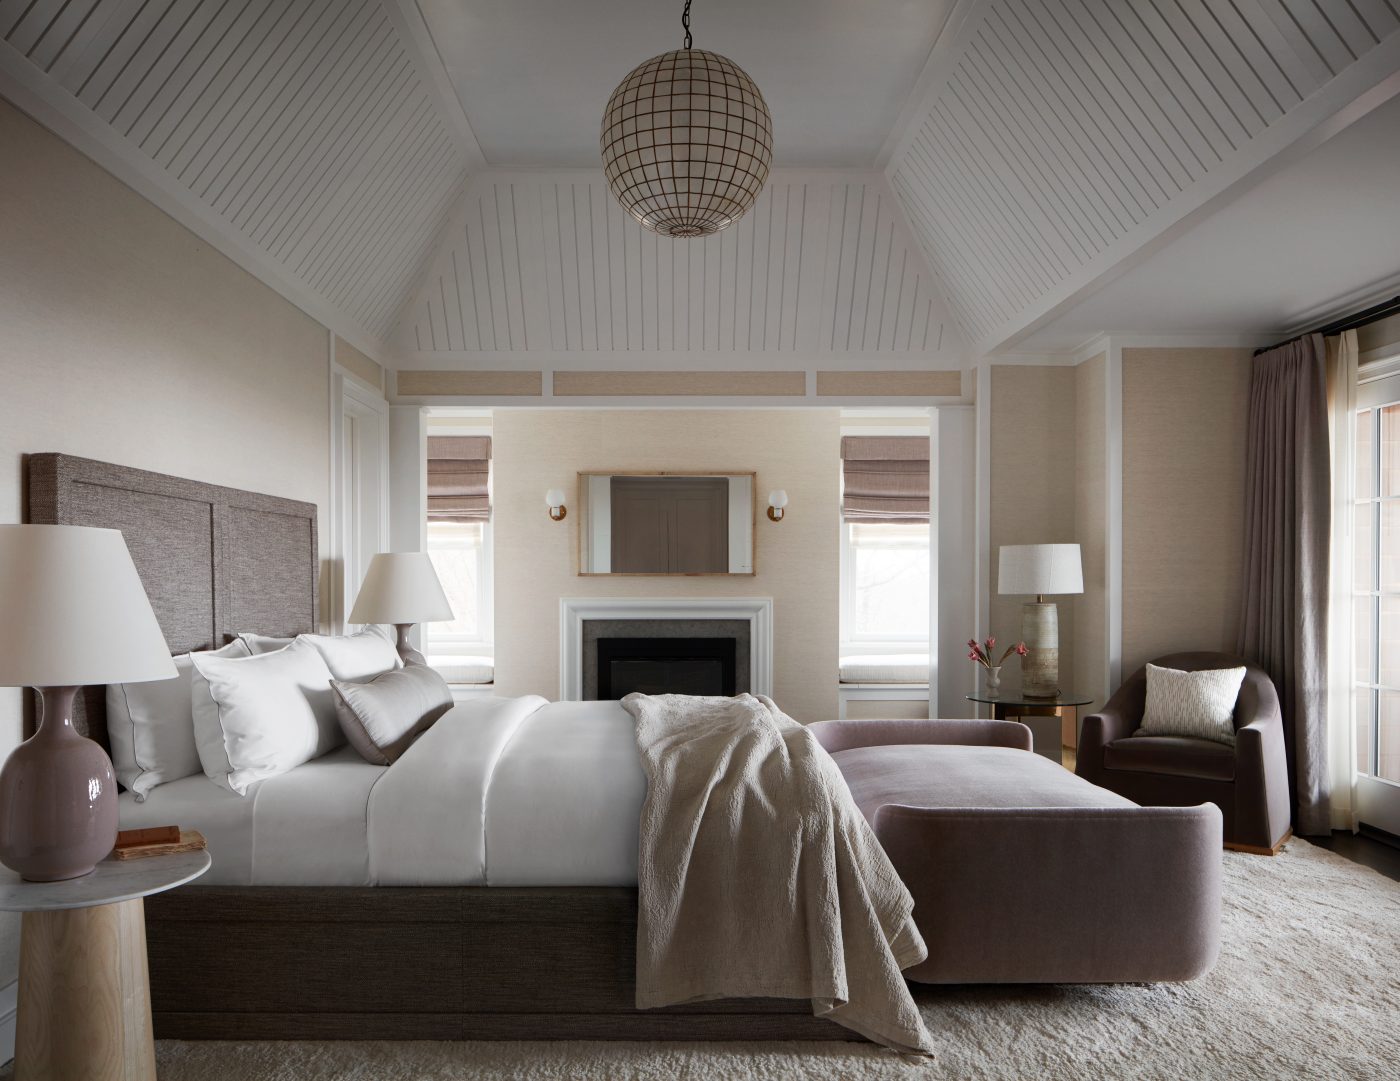 View of the primary bedroom in a Hamptons beach house designed by Charles & Co.